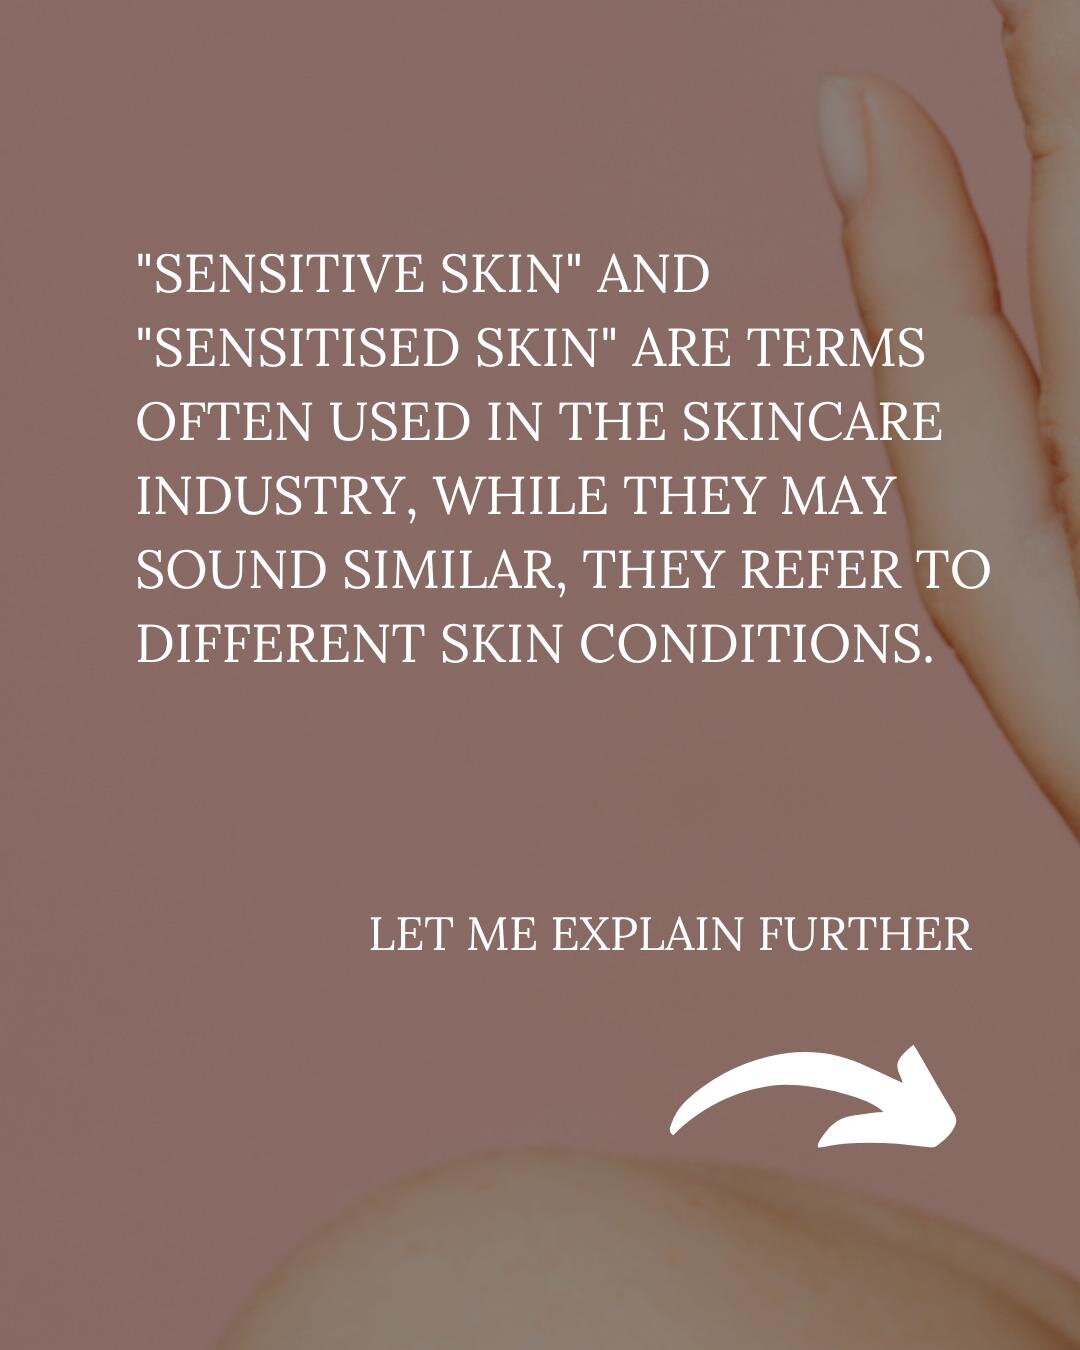 In summary, sensitive skin is often considered a more genetic, long-term characteristic, while sensitised skin is a temporary condition resulting from external factors. It's important for you to understand their skin type and condition to choose appr